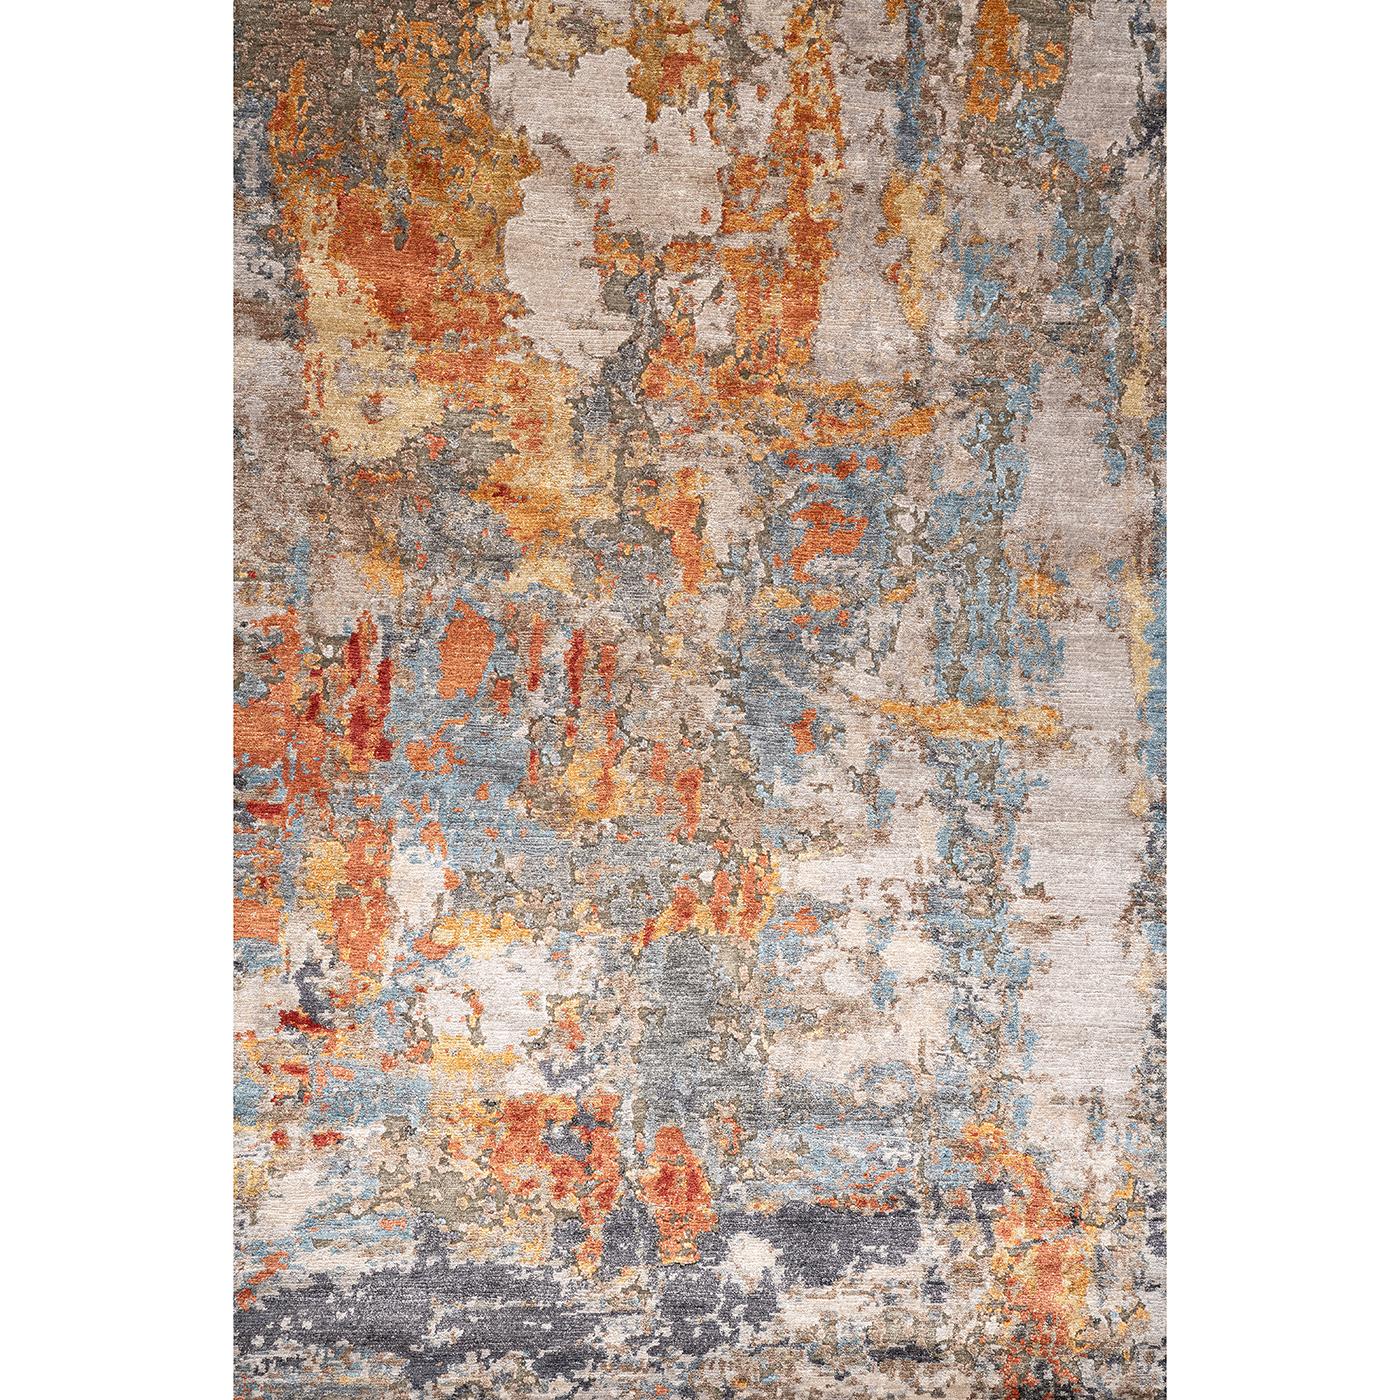 With its high-low pile in bamboo silk, and the warp and weft in cotton, this beautifully crafted Multicolor Rug is made in India using the Tibetan knotting technique (100 knots per square inch). This version features multiple colors, though the rug